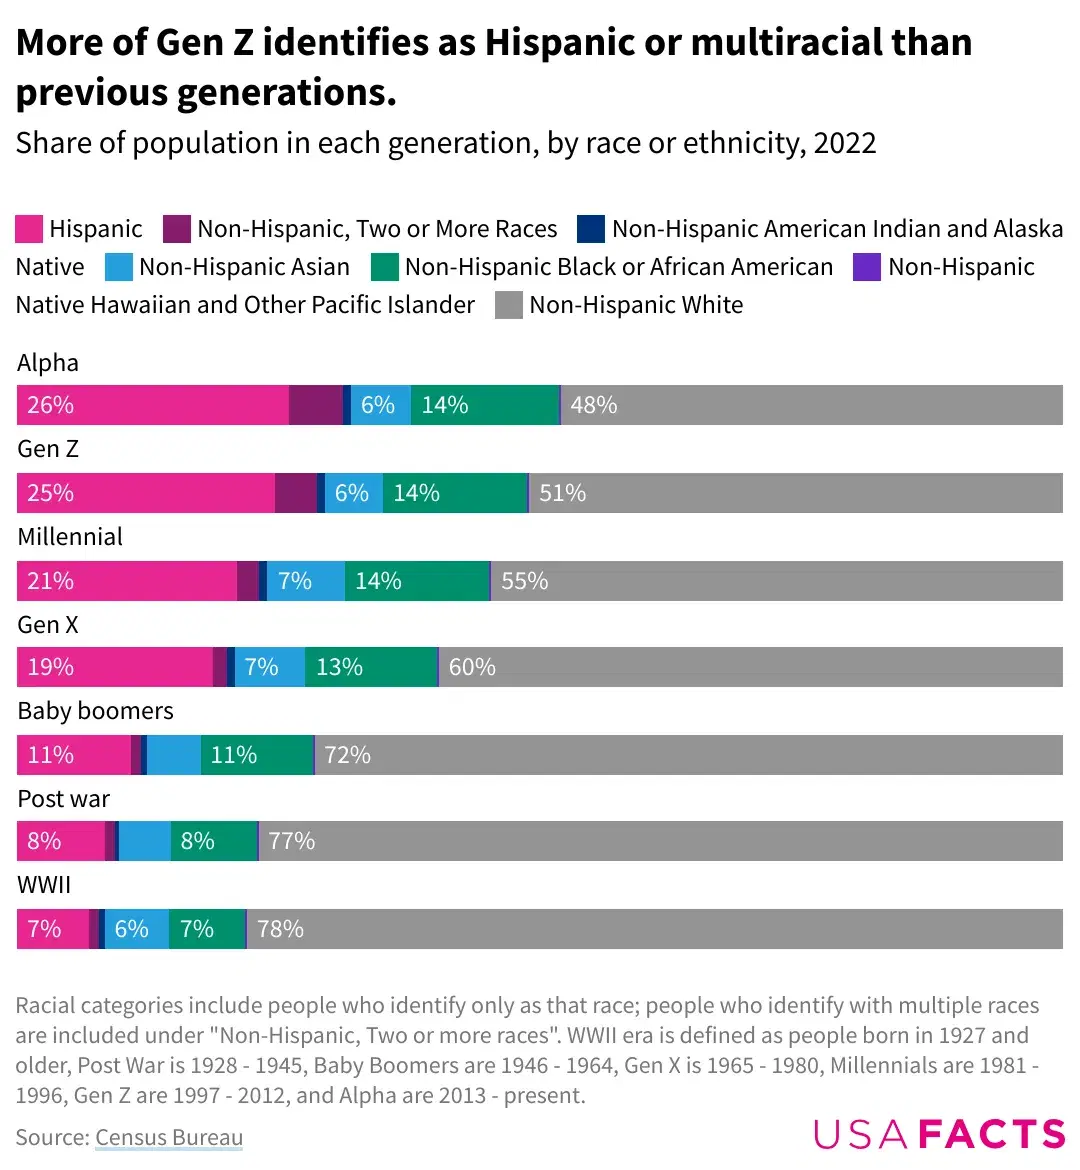 How does the Racial Makeup of Gen Z Compare to Previous Generations?